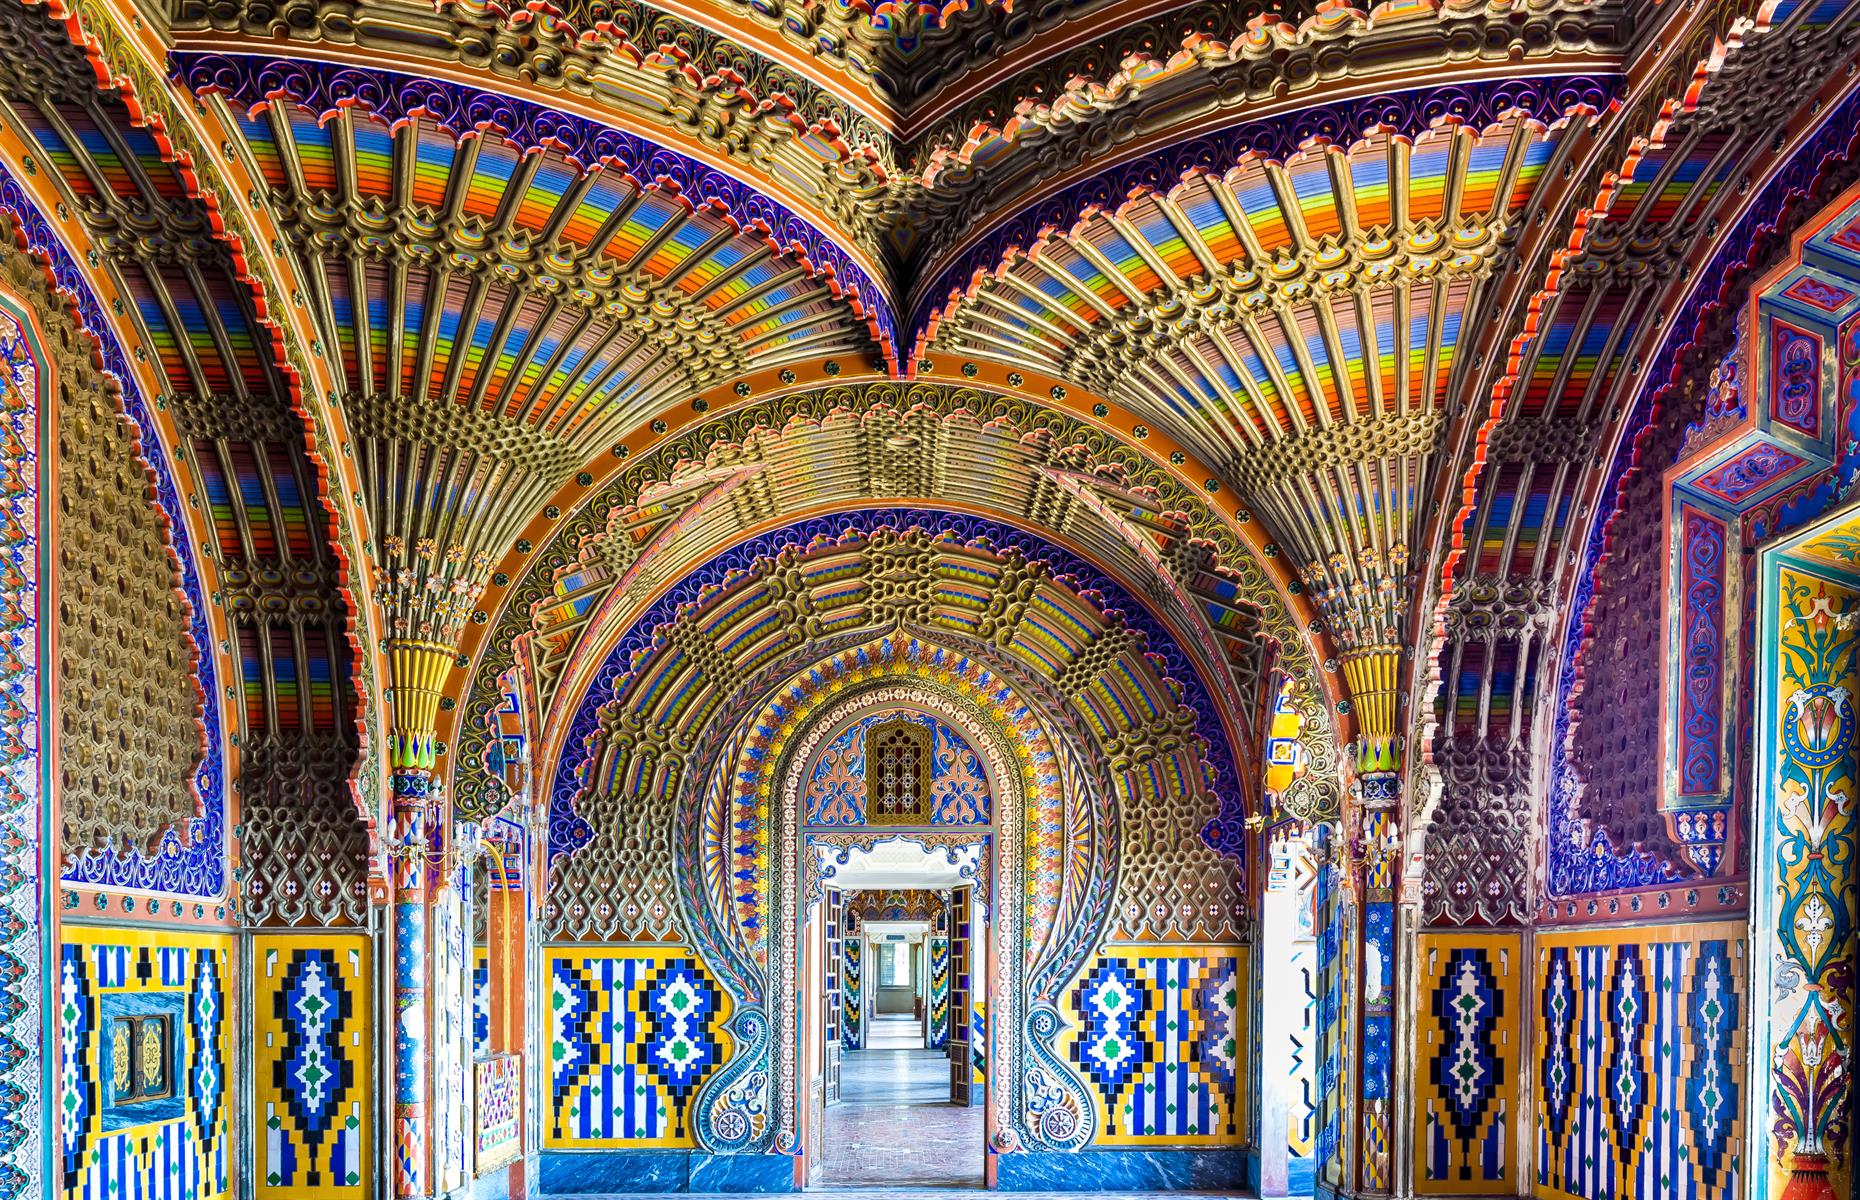 <p>Inside, the elaborate décor is as pristine as the day it was made. The bright colors and glorious patterns continue to dazzle despite the building having stood empty since it was abandoned in the 1990s. Although uninhabited, the house hasn't been forsaken. Could you turn your back on such an incredible place?</p>